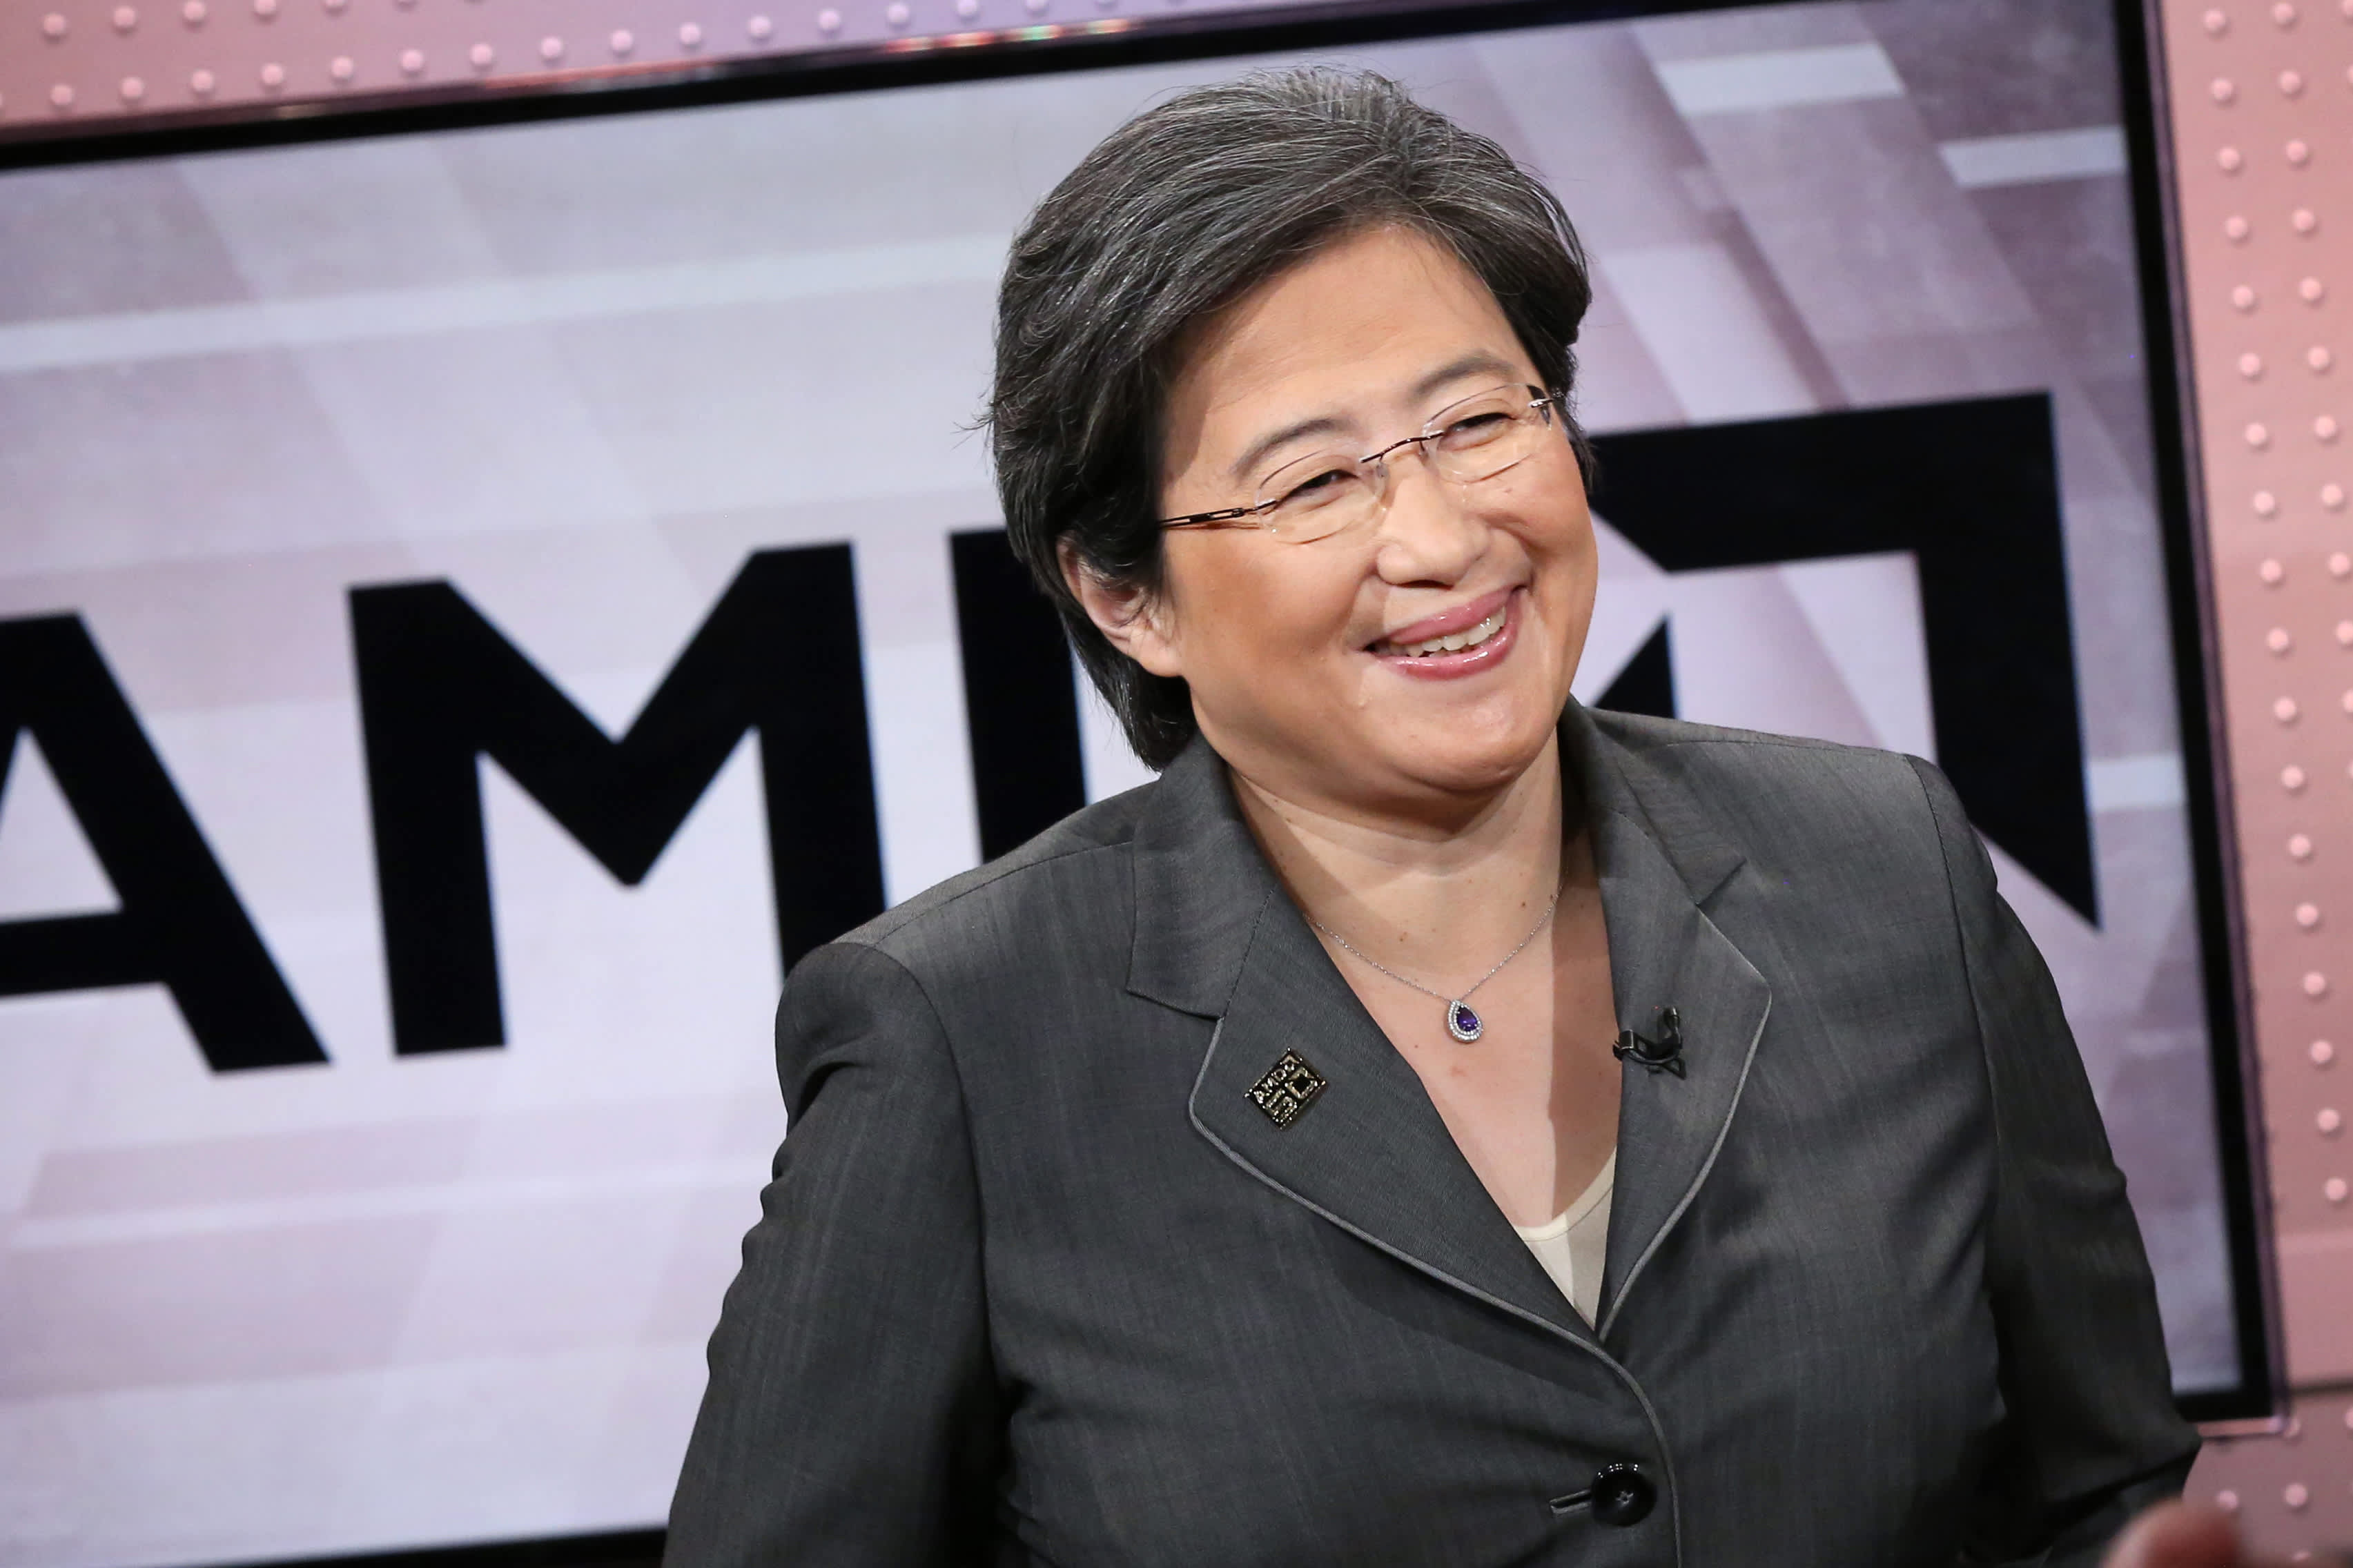 Intel Shakeup creates a buying opportunity in AMD, says Jim Cramer